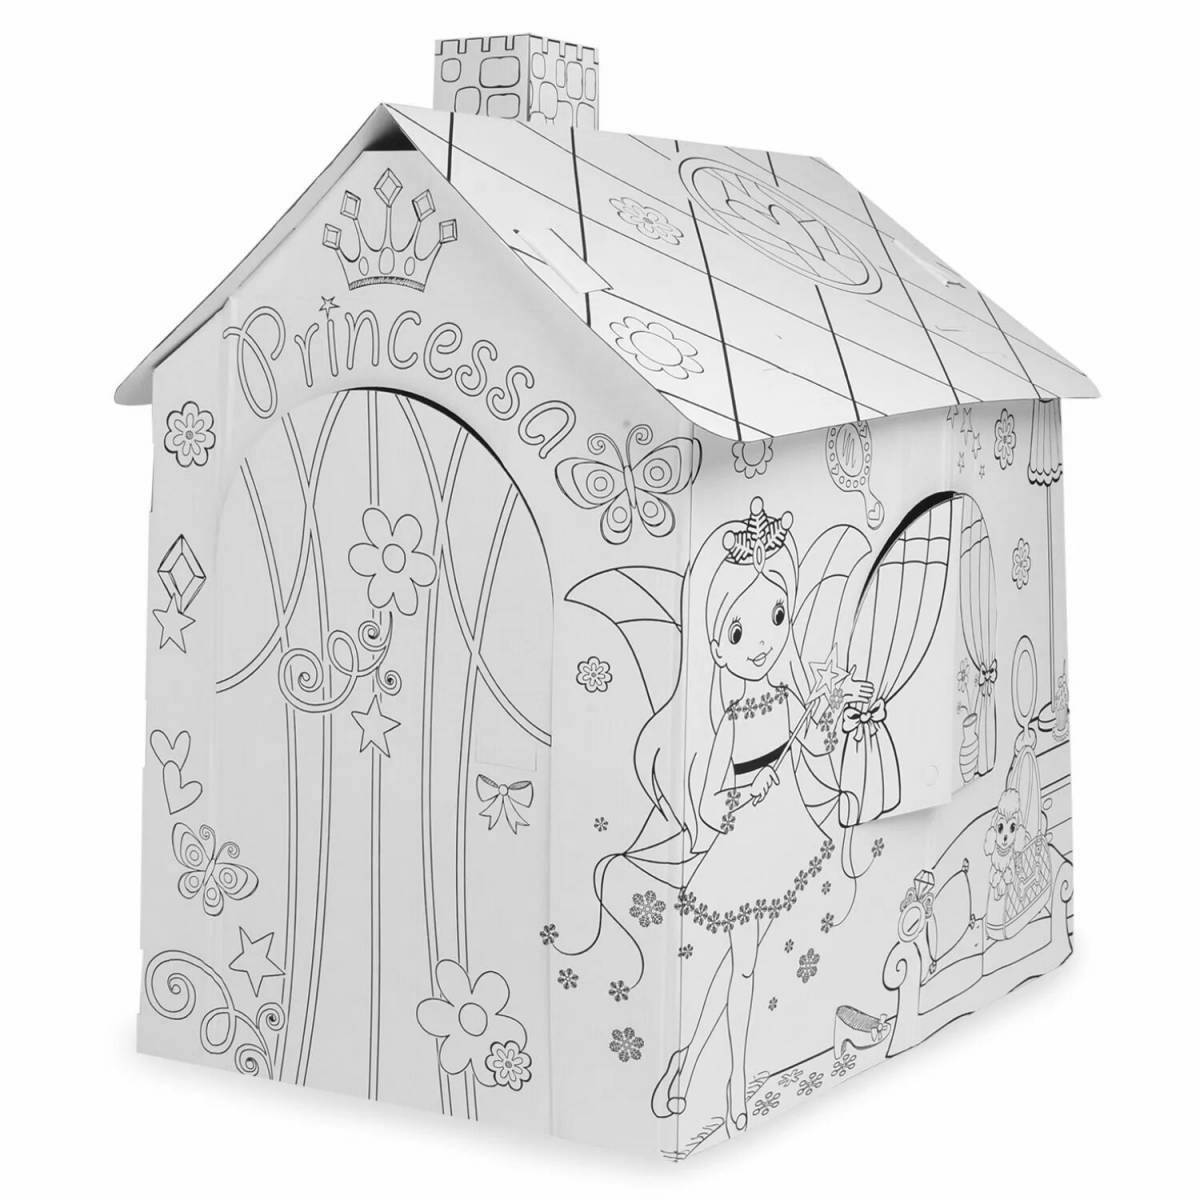 Bright cardboard house for coloring